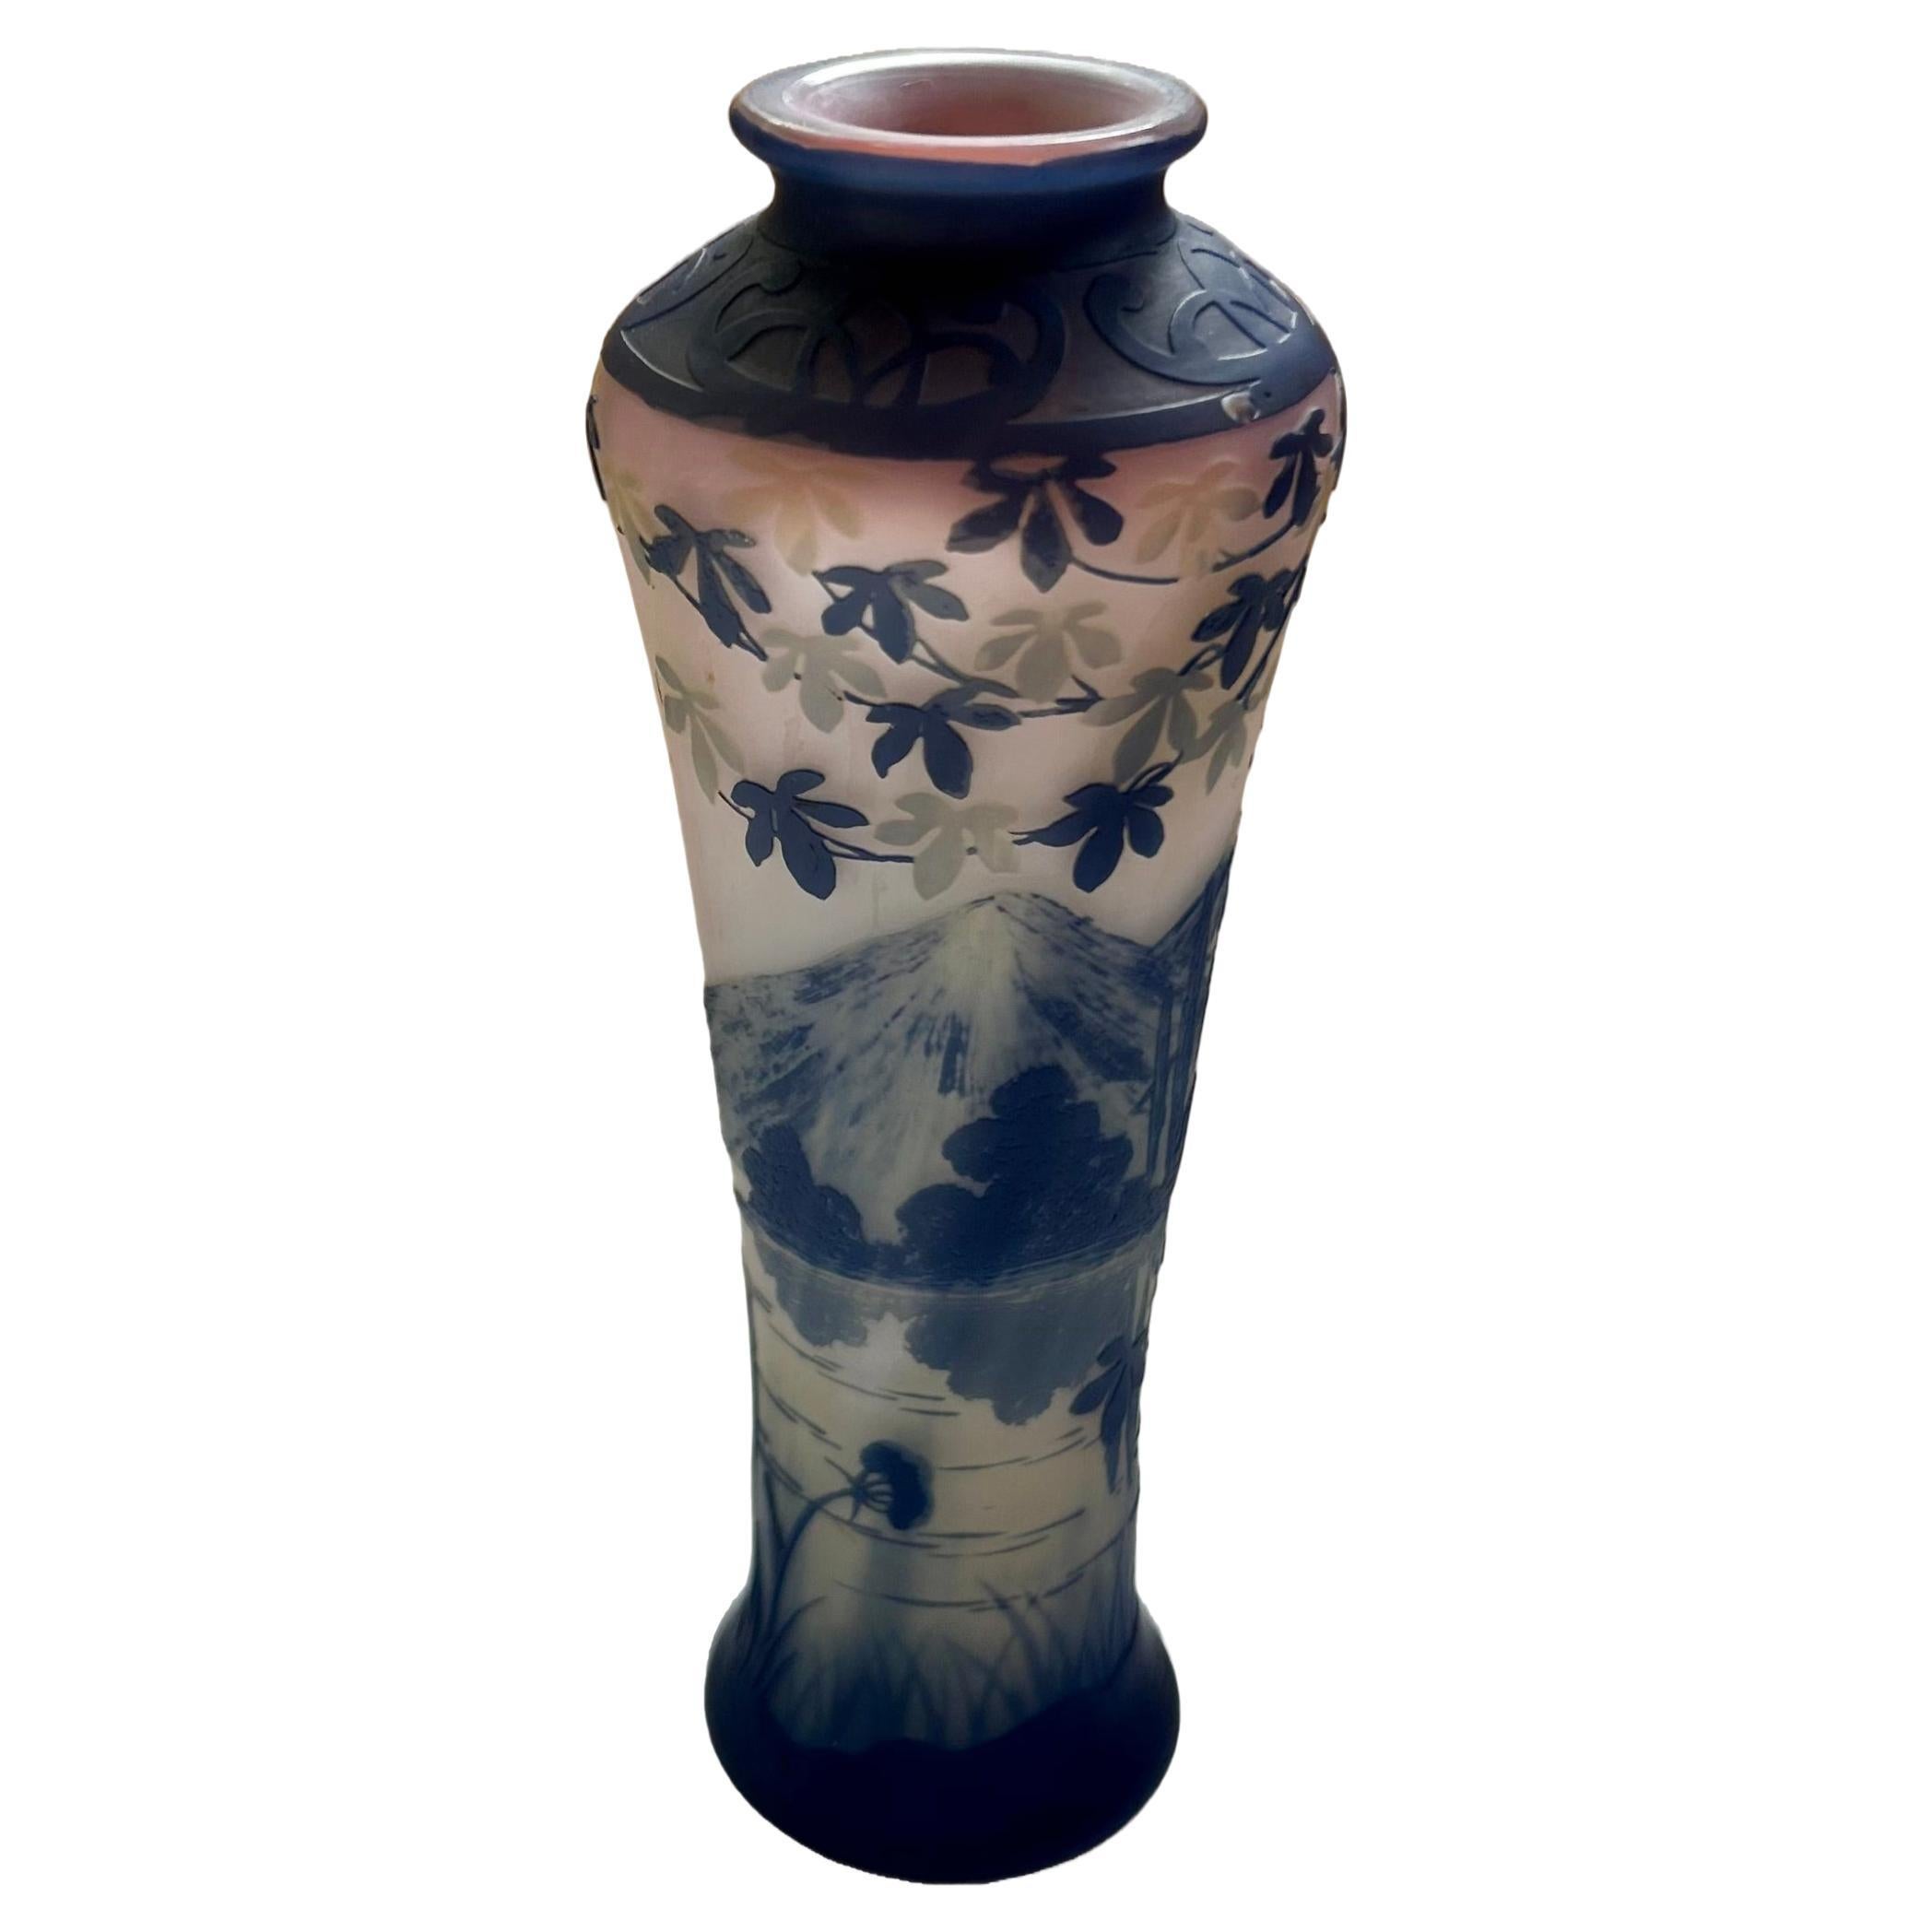 This is an exquisite, petite, early 20th-century cameo glass vase, hand etched with a Japanese  inspired scene, including distant mountains, a lake, and cascading willow branches, flowers and reeds in the foreground . Gorgeous hand finished details,